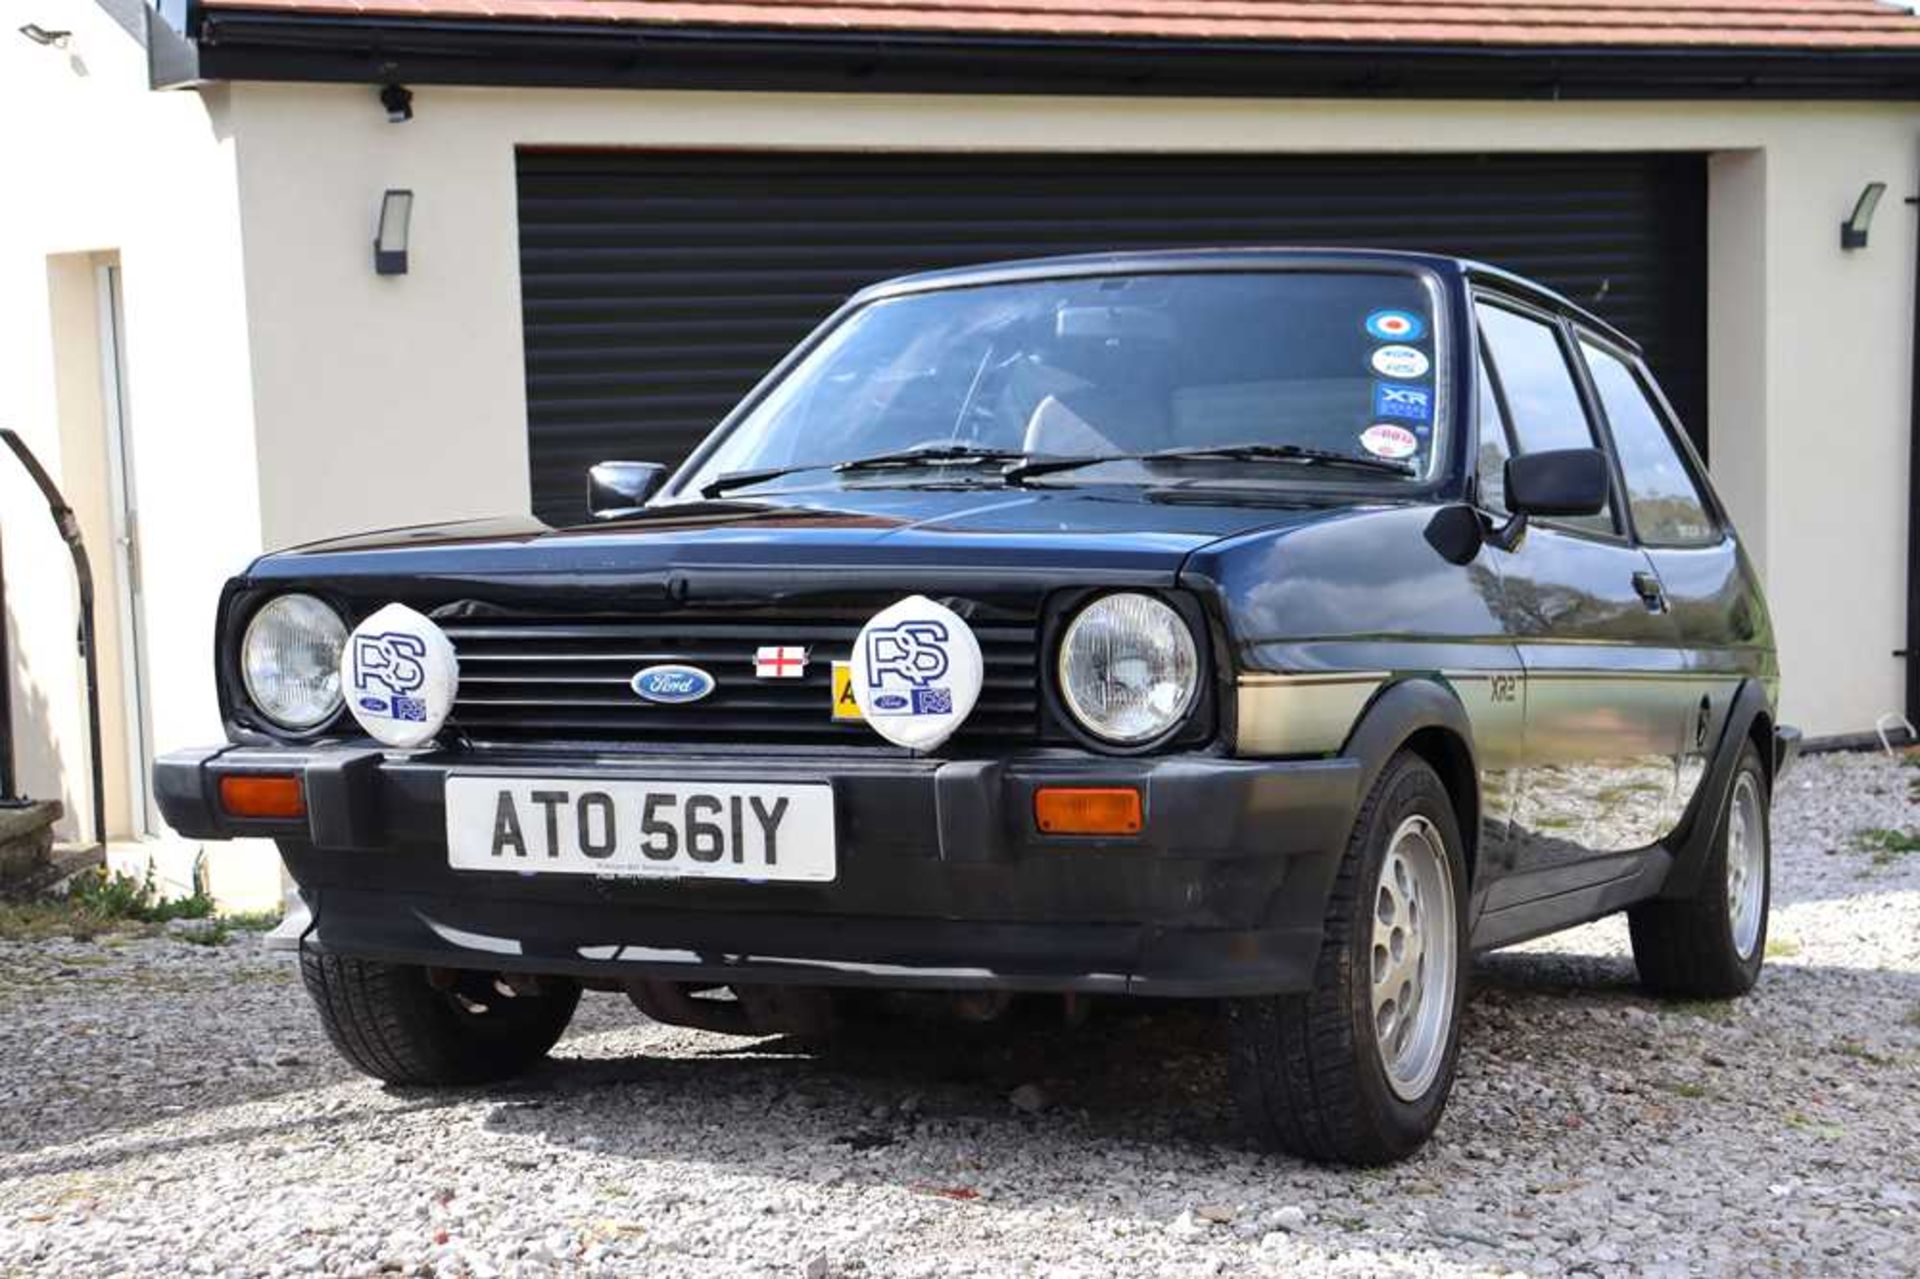 1983 Ford Fiesta XR2 - Image 5 of 56